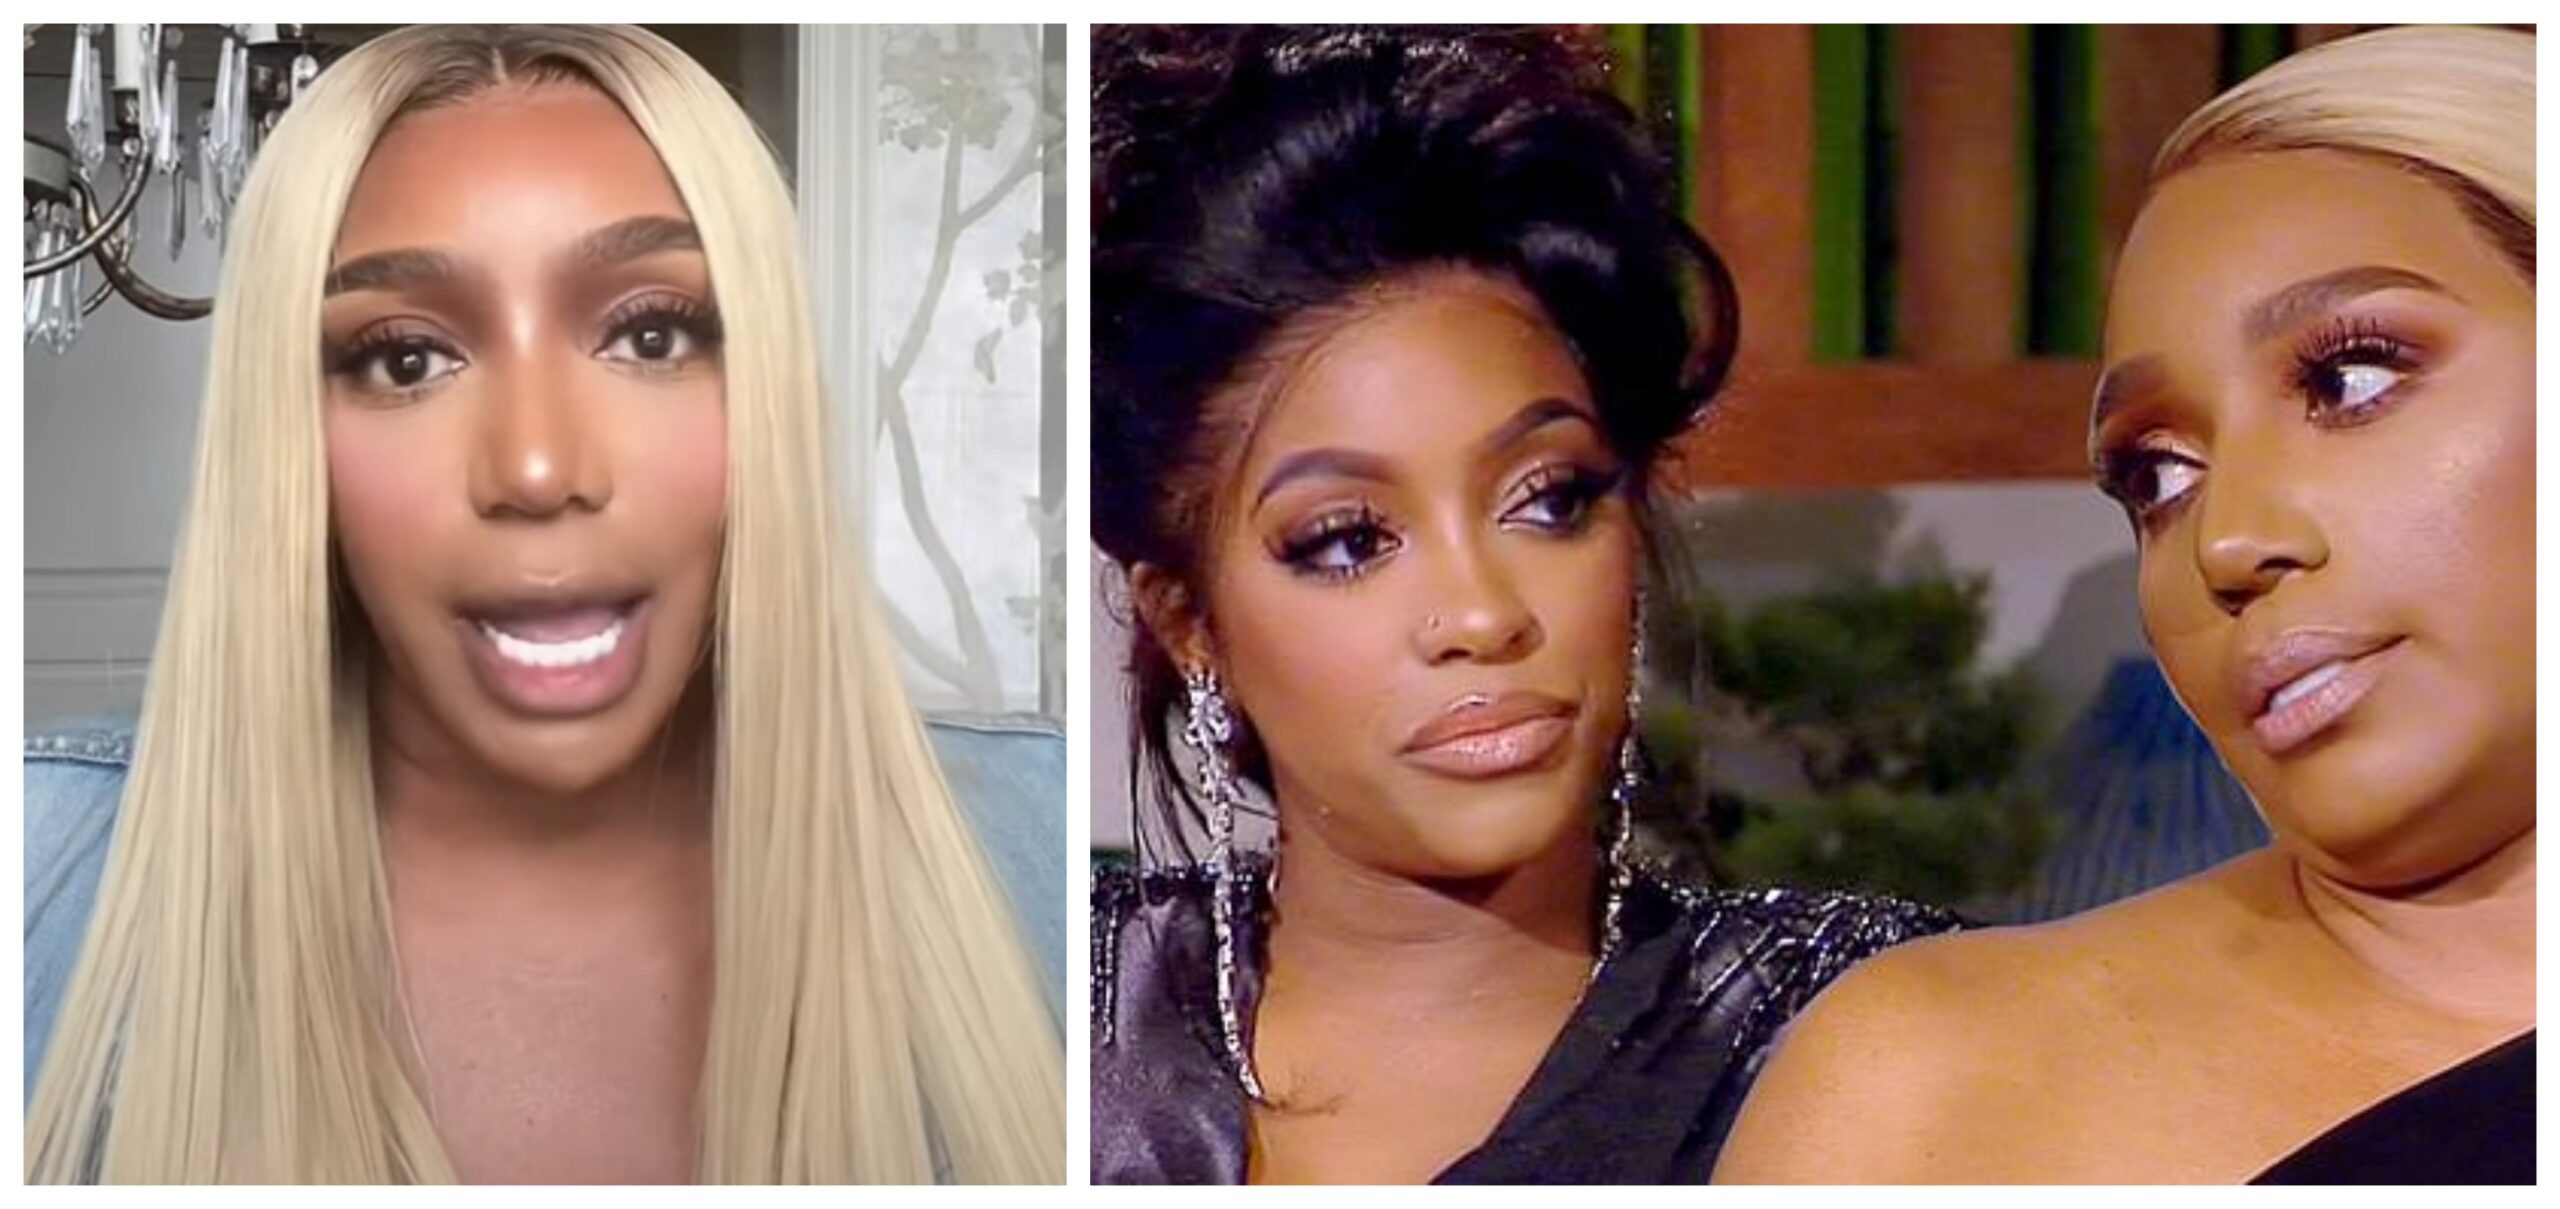 Nene Leakes SLAMS Porsha Williams for Allegedly Refusing to Film ‘The Upshaws’ with Her: “She is NOT a Star”